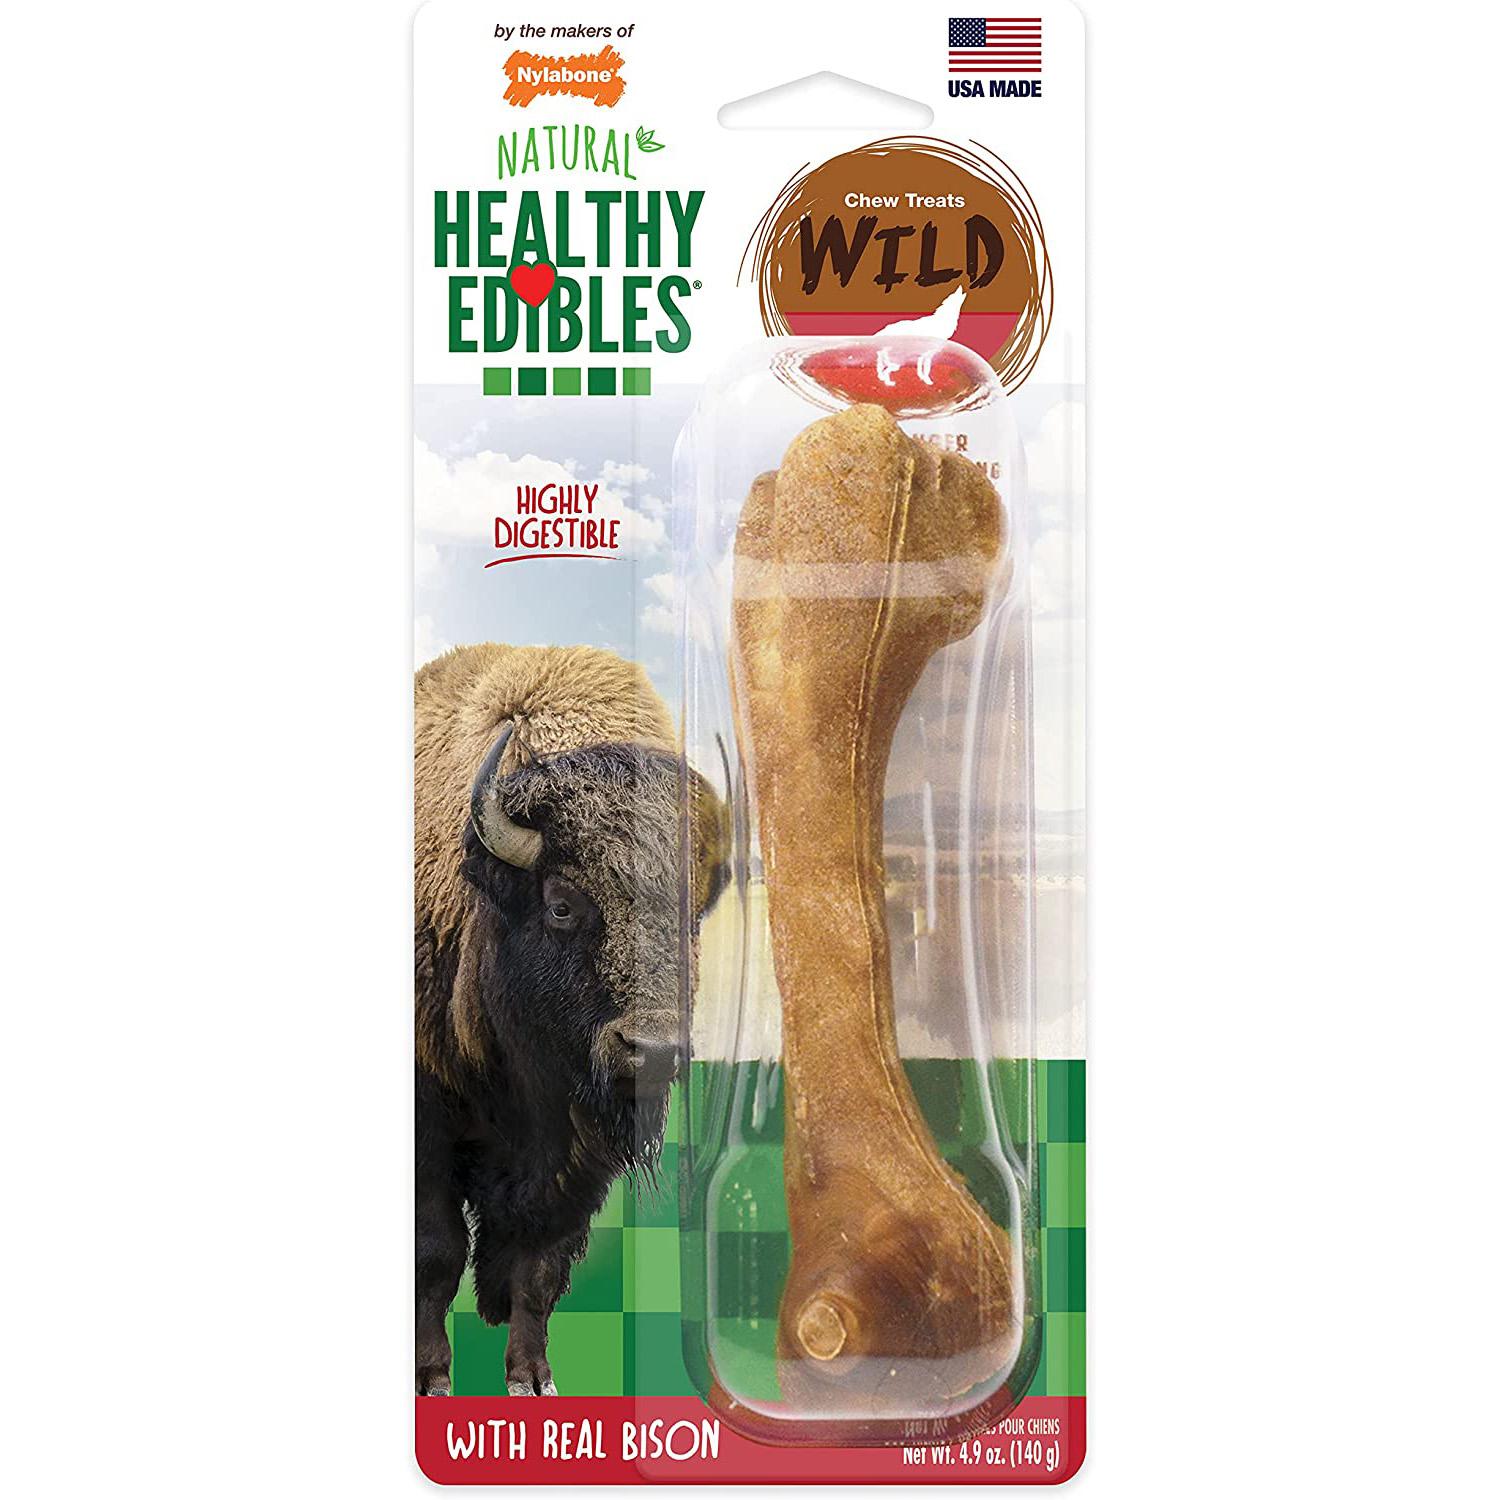 Nylabone Healthy Edibles Wild All Natural Dog Treat for $2.49 Shipped